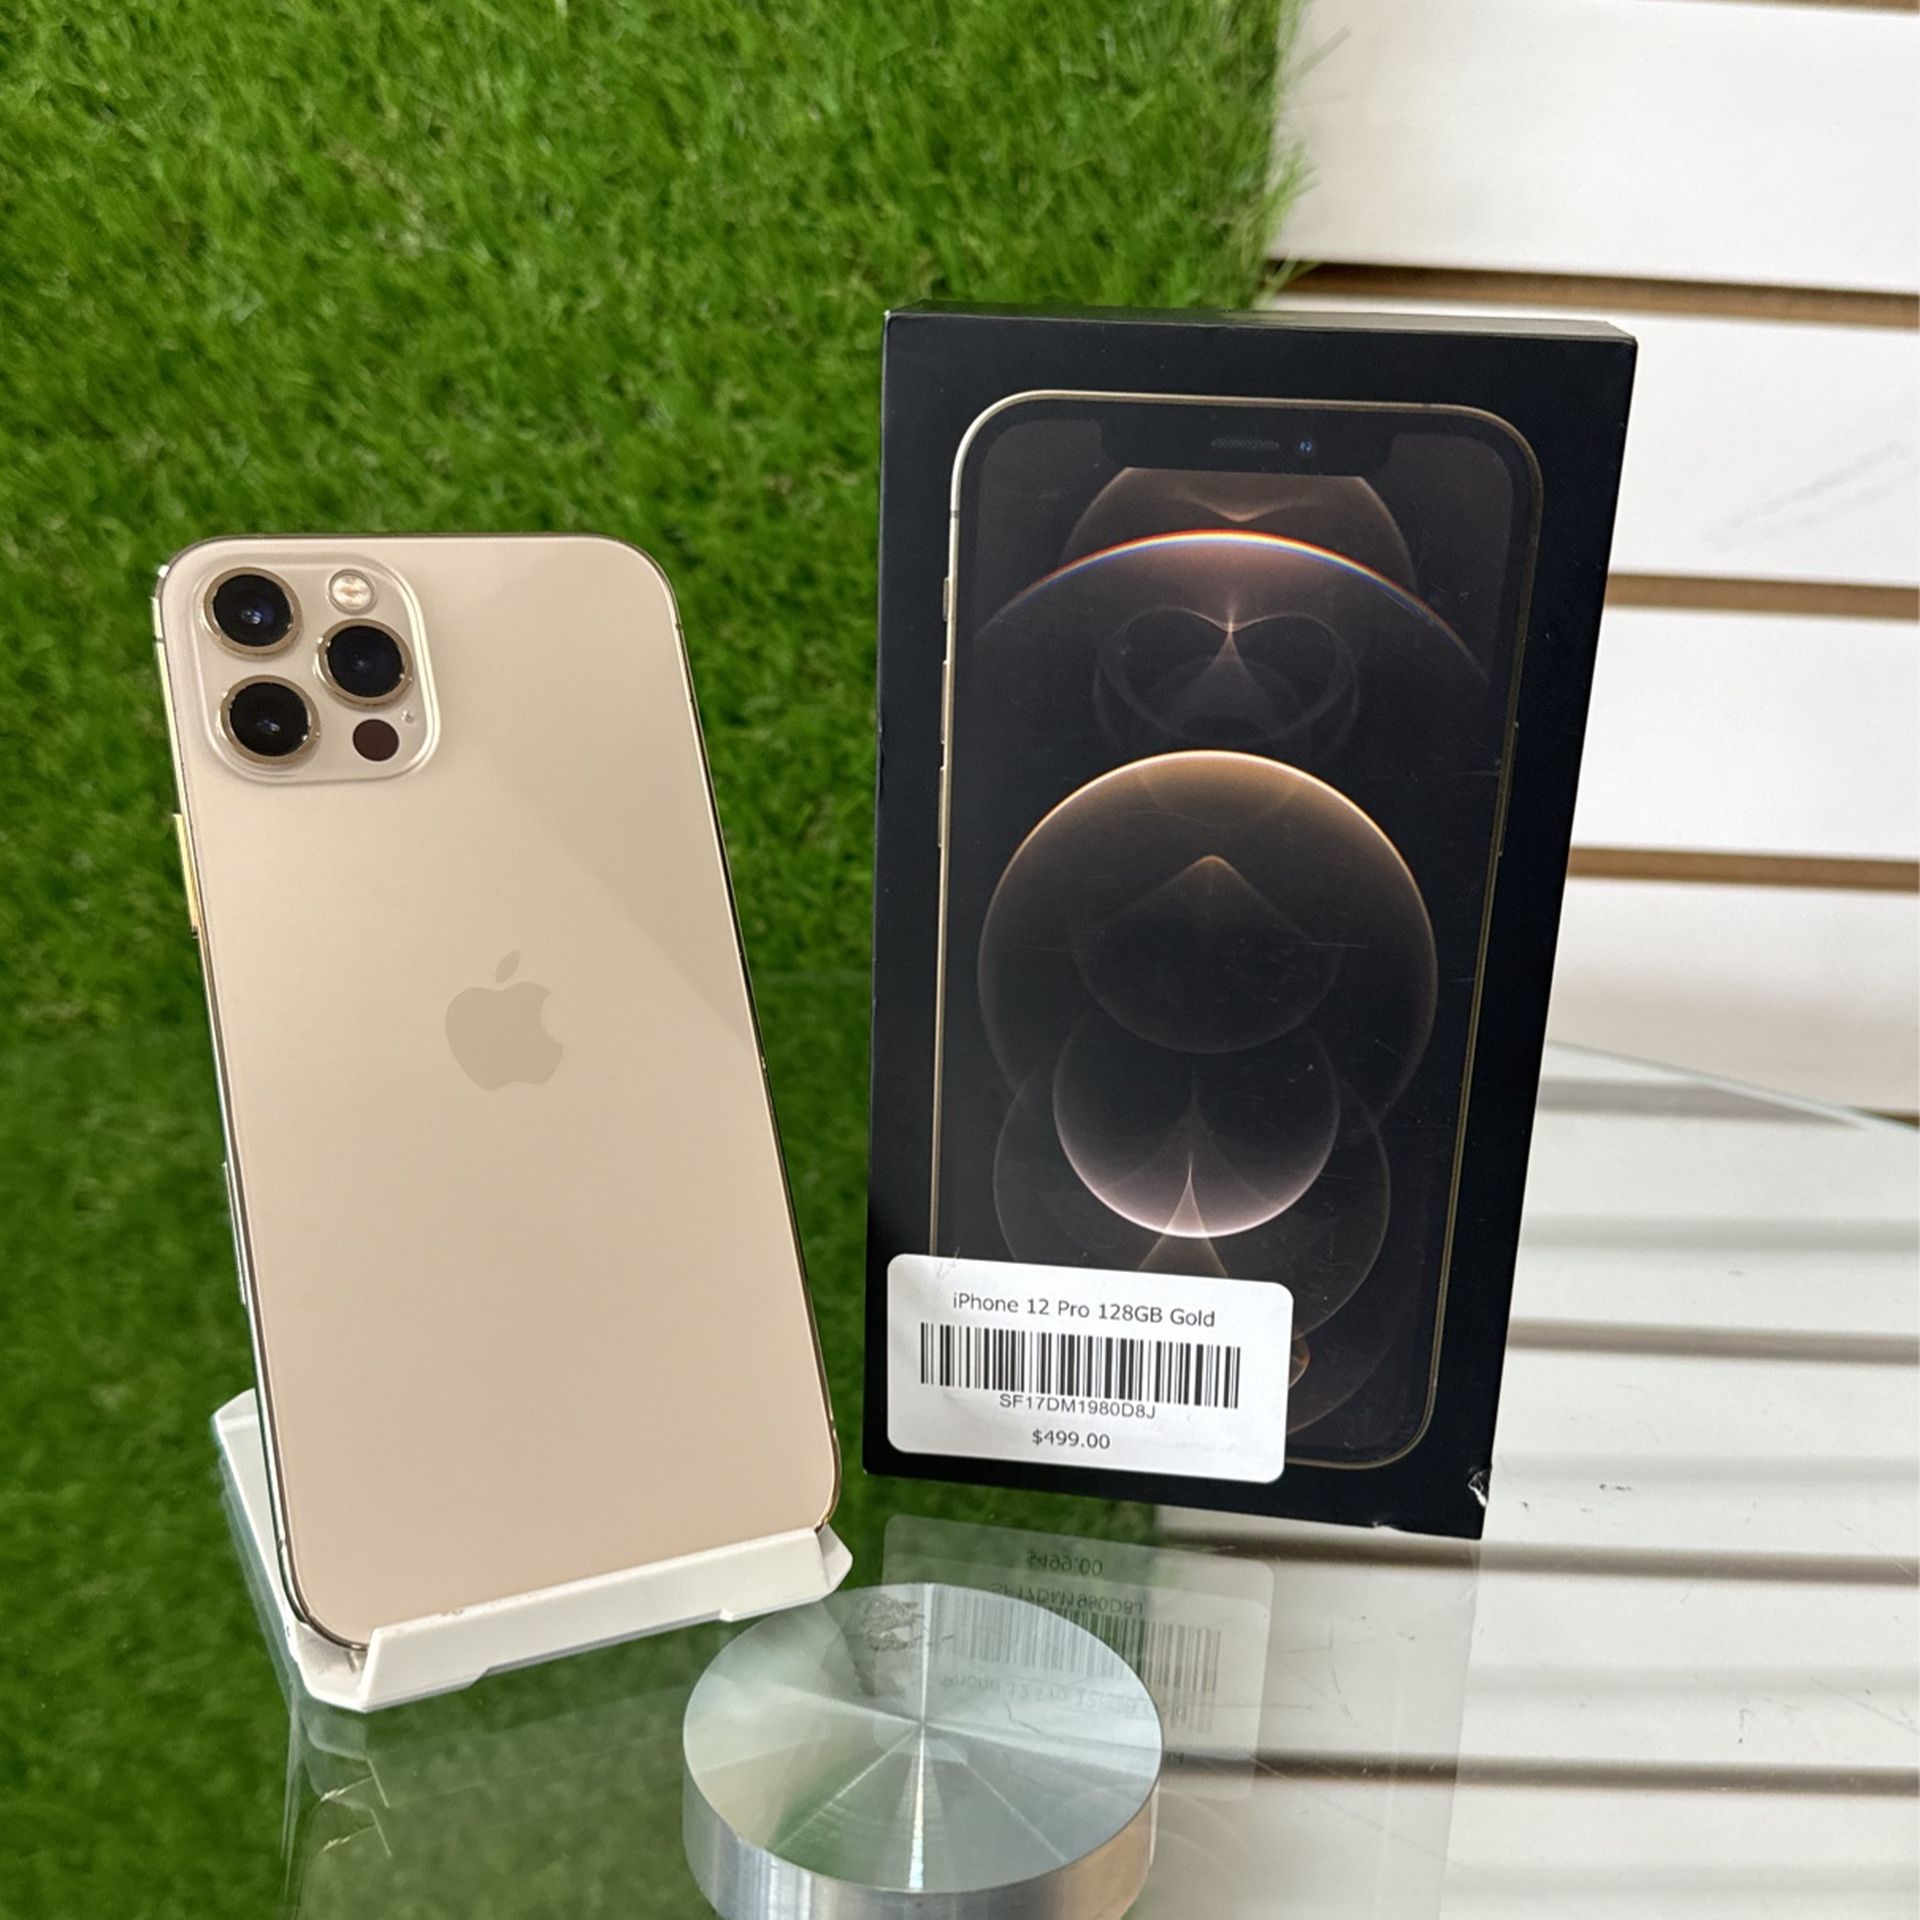 iPhone 12 Pro 128gb Unlocked ( Payments Available)